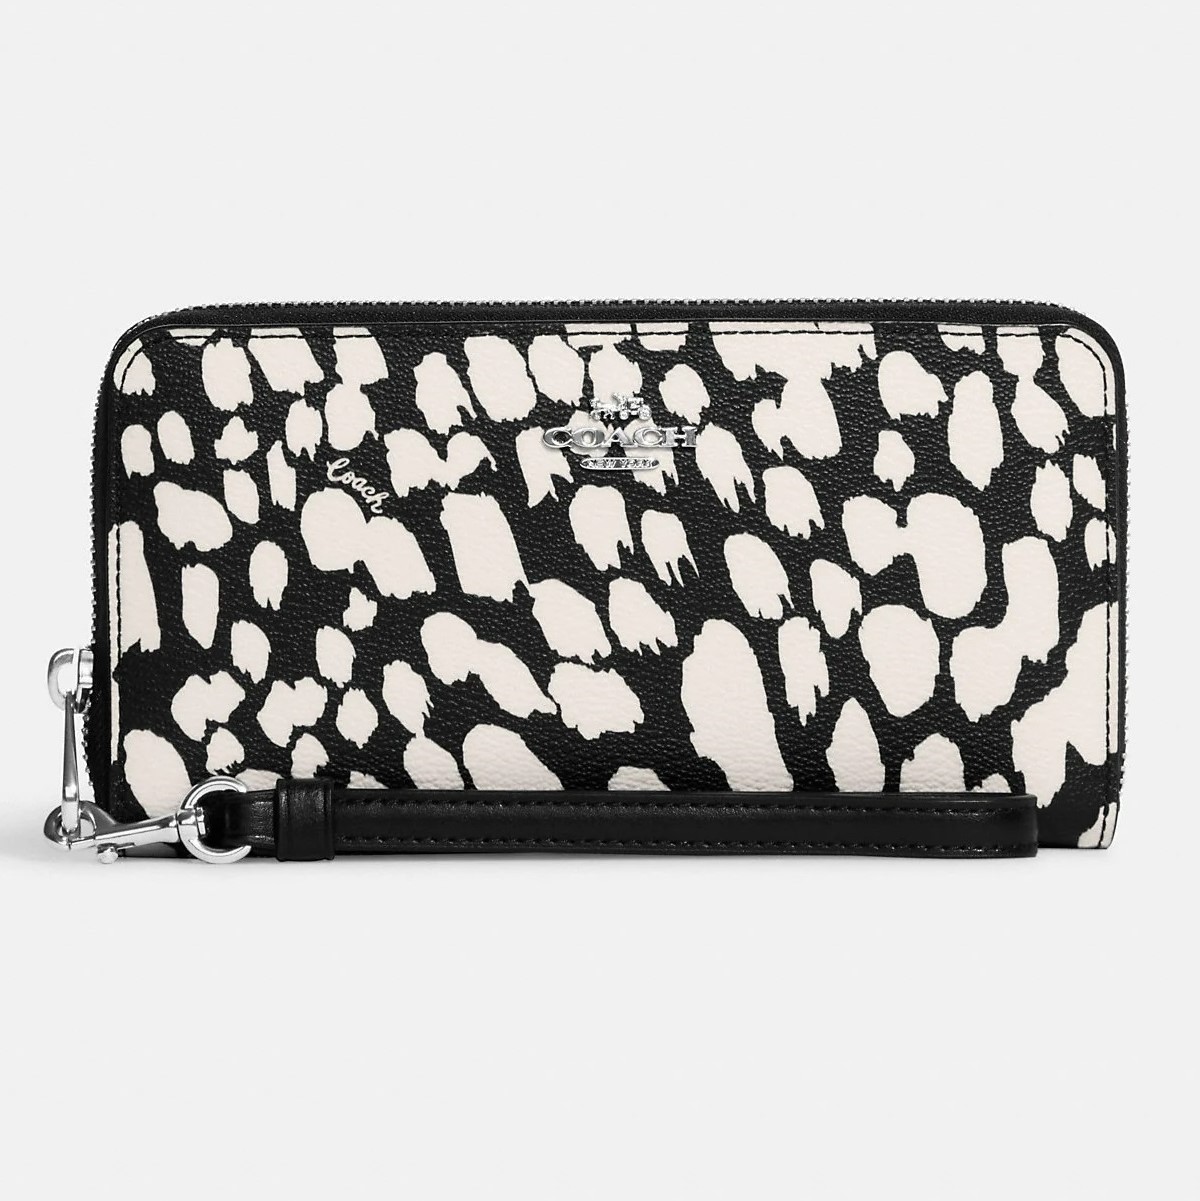 VÍ COACH NỮ LONG ZIP AROUND WALLET WITH SPOTTED ANIMAL PRINT 2